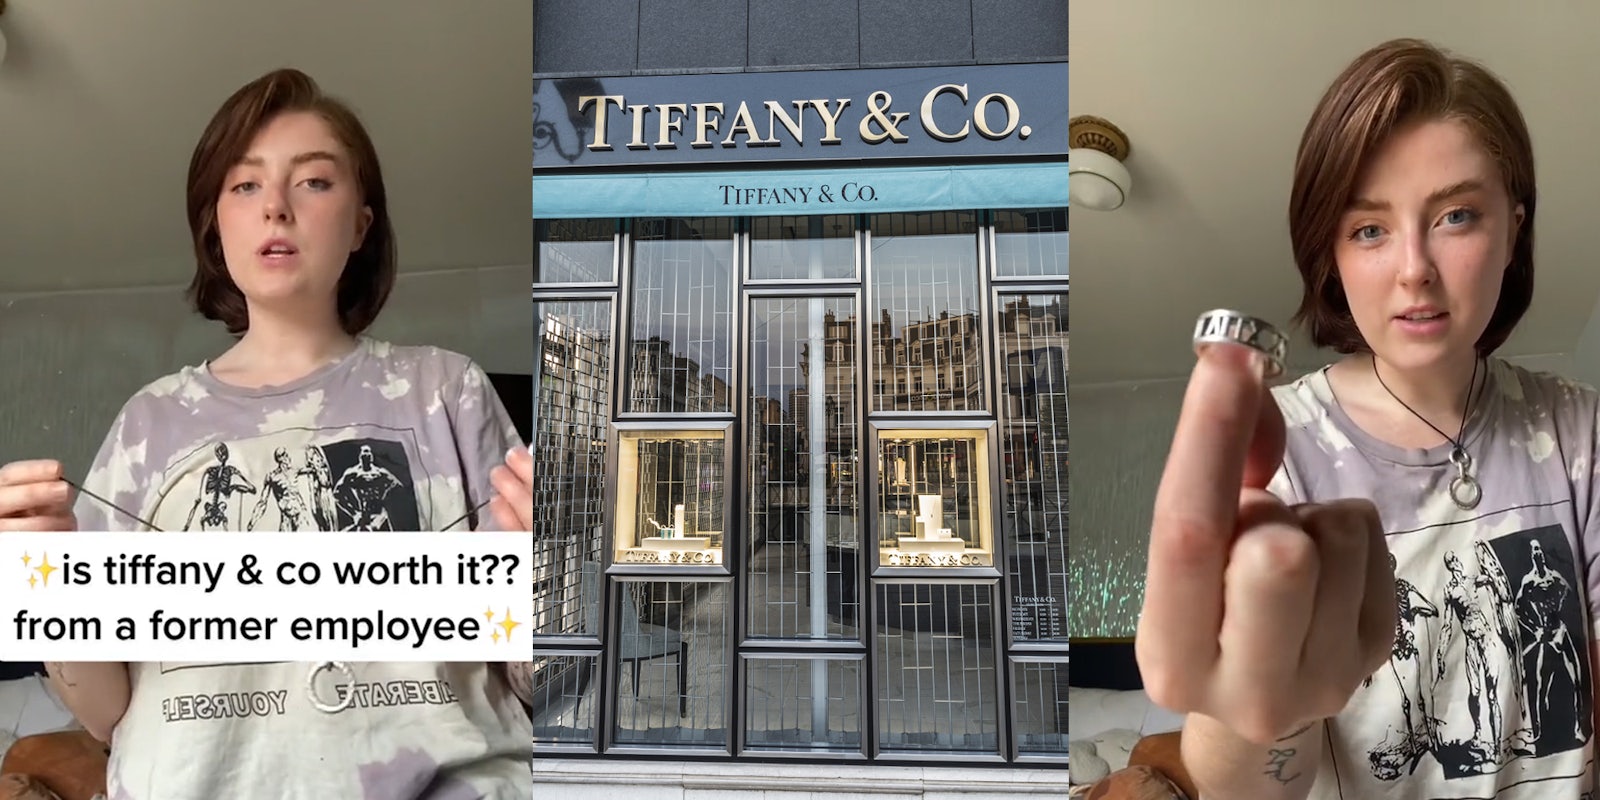 former Tiffany & Co. employee speaking with caption 'is tiffany & co worth it?? from a former employee' (l) Tiffany & Co. building with sign (c) former Tiffany & Co. employee speaking holding out ring (r)